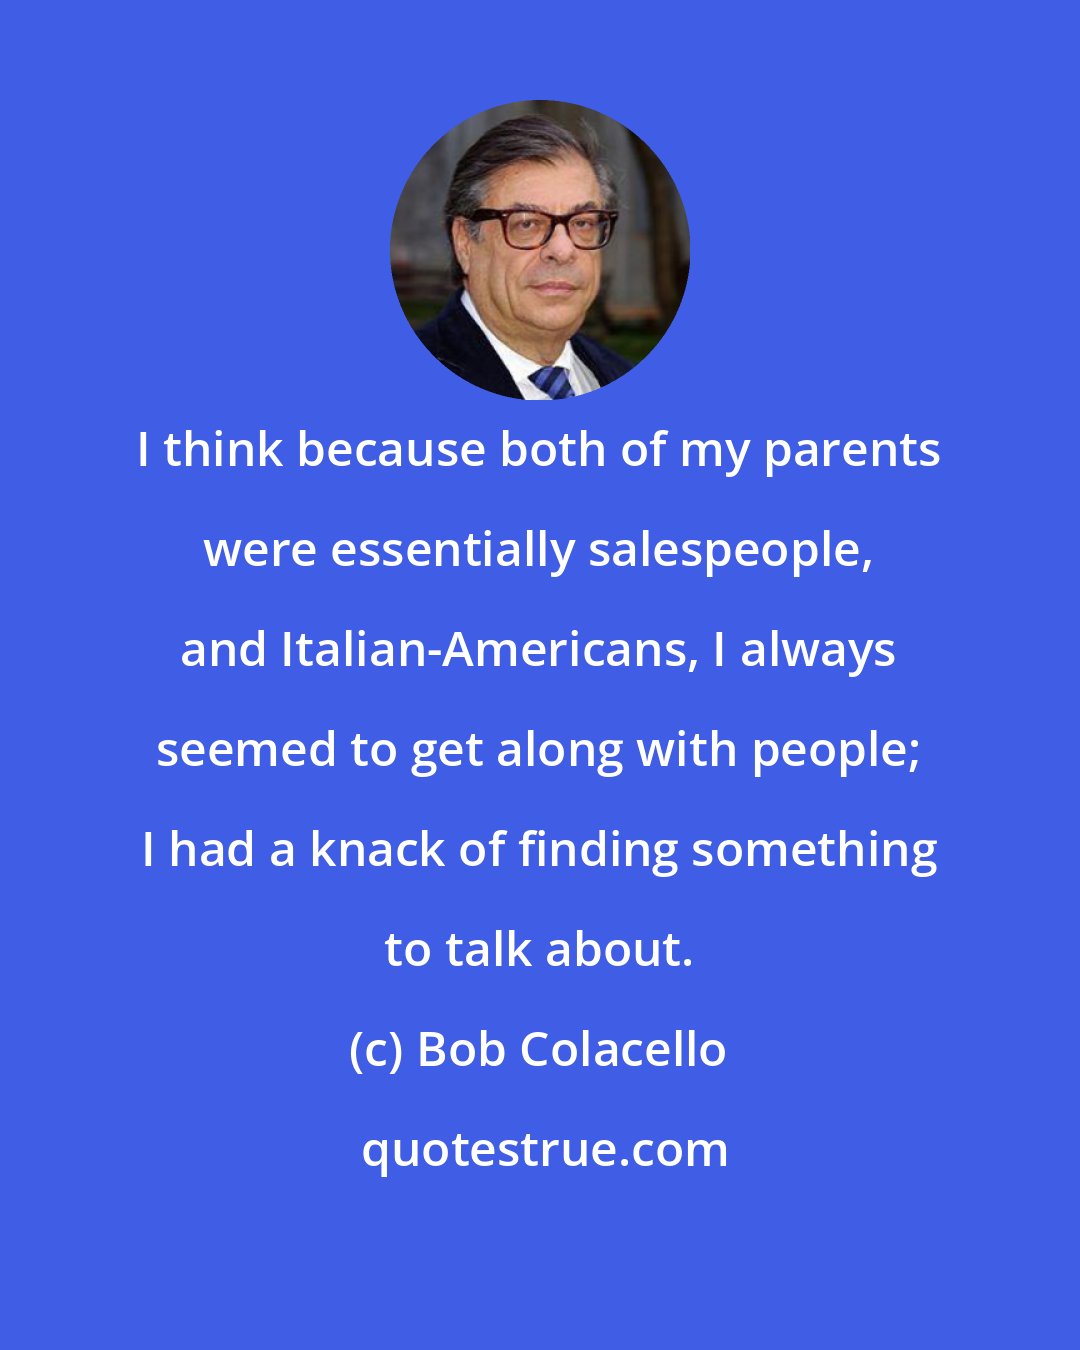 Bob Colacello: I think because both of my parents were essentially salespeople, and Italian-Americans, I always seemed to get along with people; I had a knack of finding something to talk about.